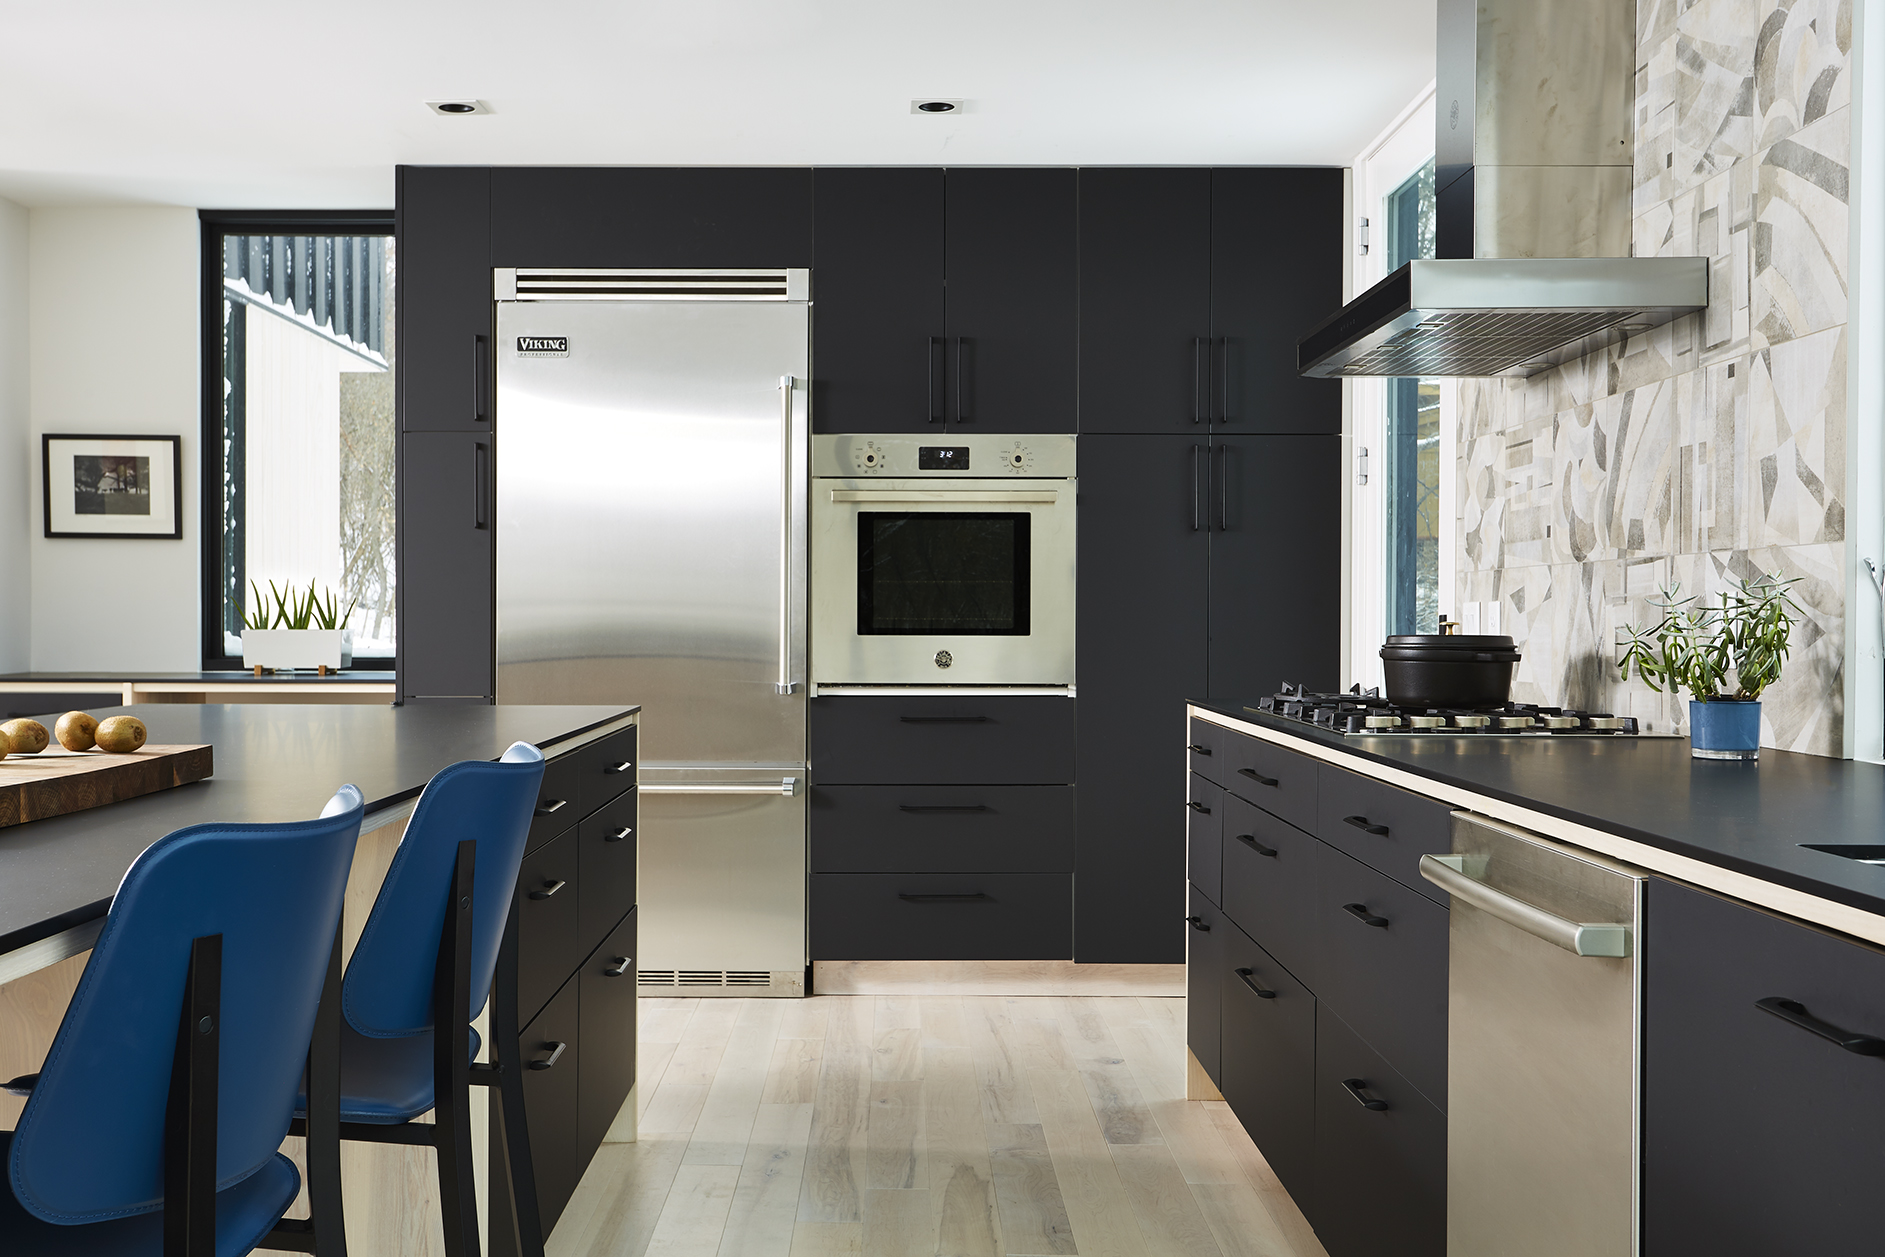 Modern monochromatic kitchen renovation with black cabinetry and wood accents